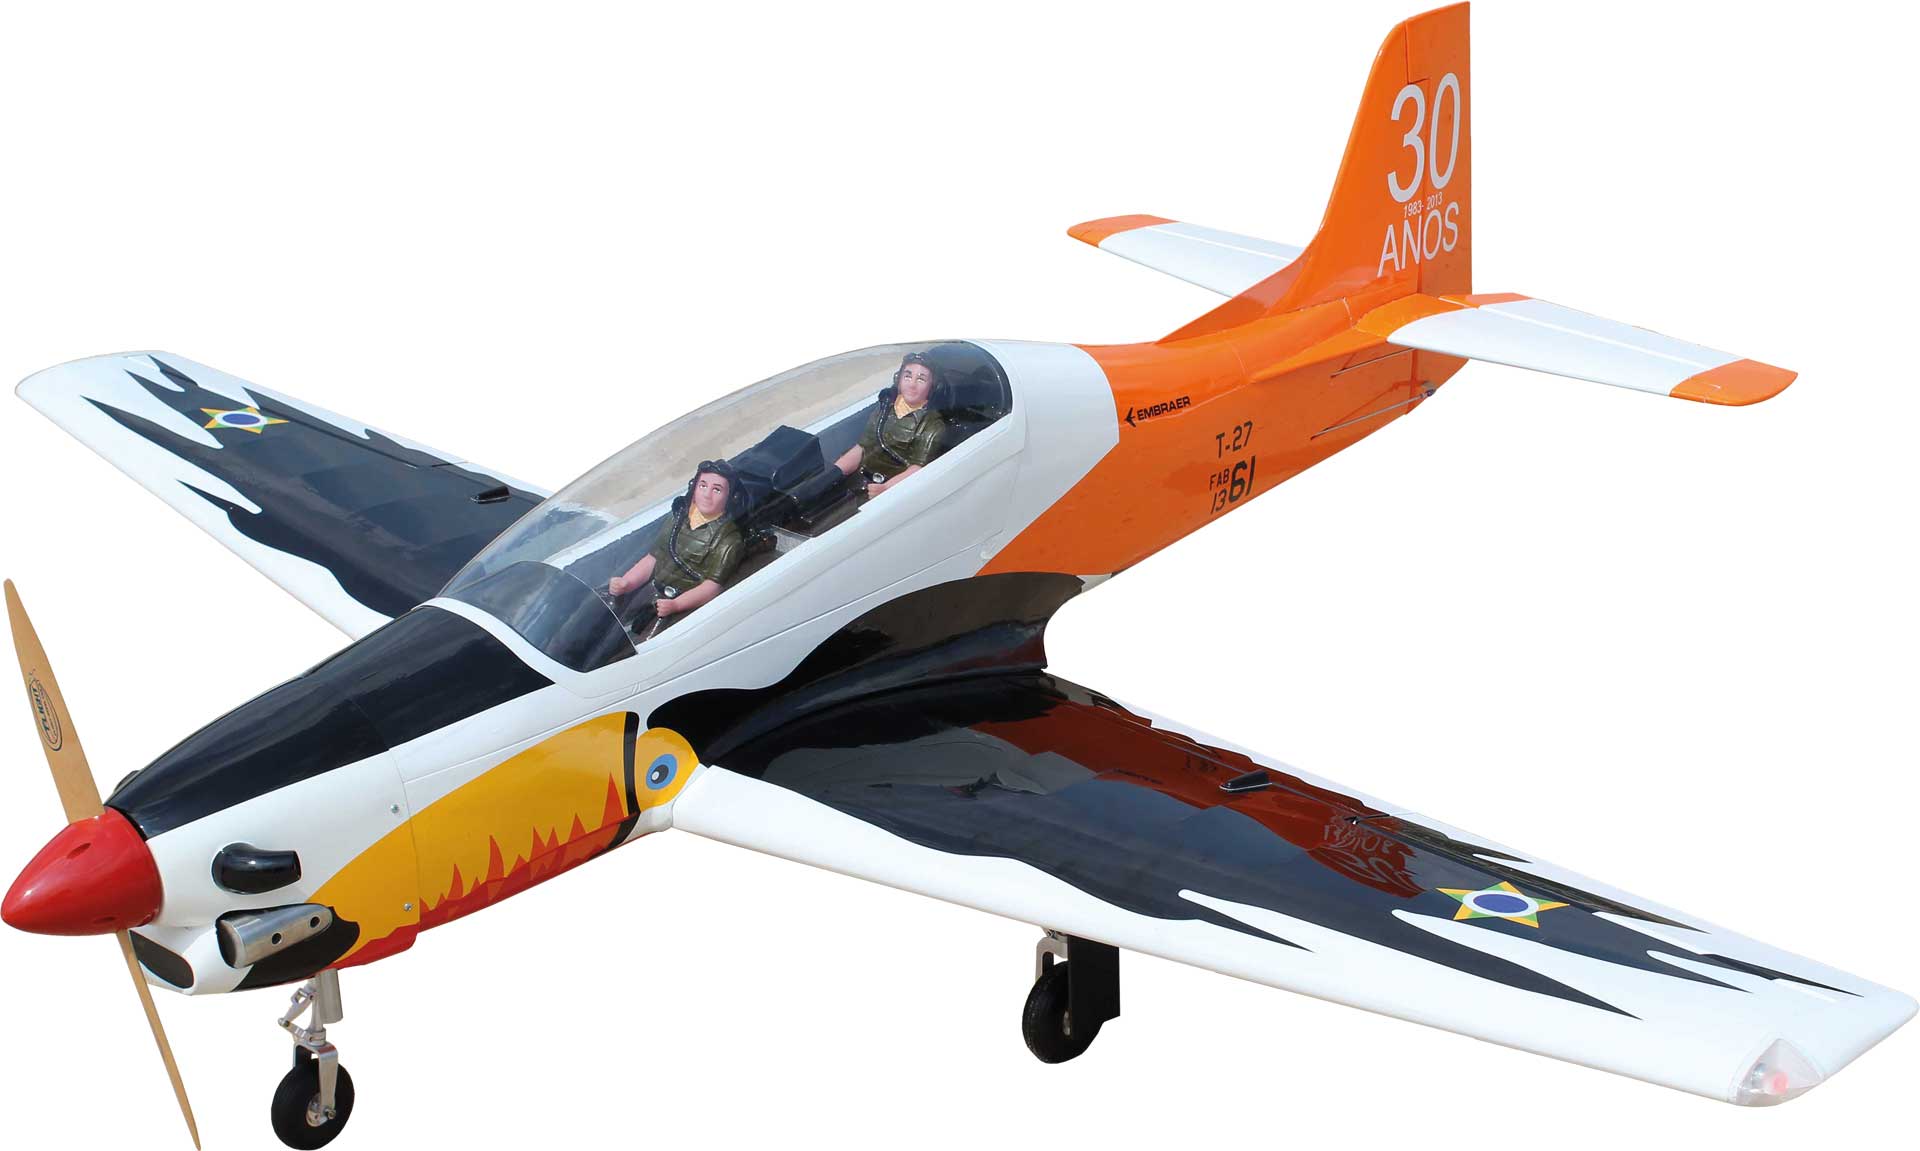 Seagull Models ( SG-Models ) Embraer T-27 Tucano 85" 35-40cc without retractable landing gear